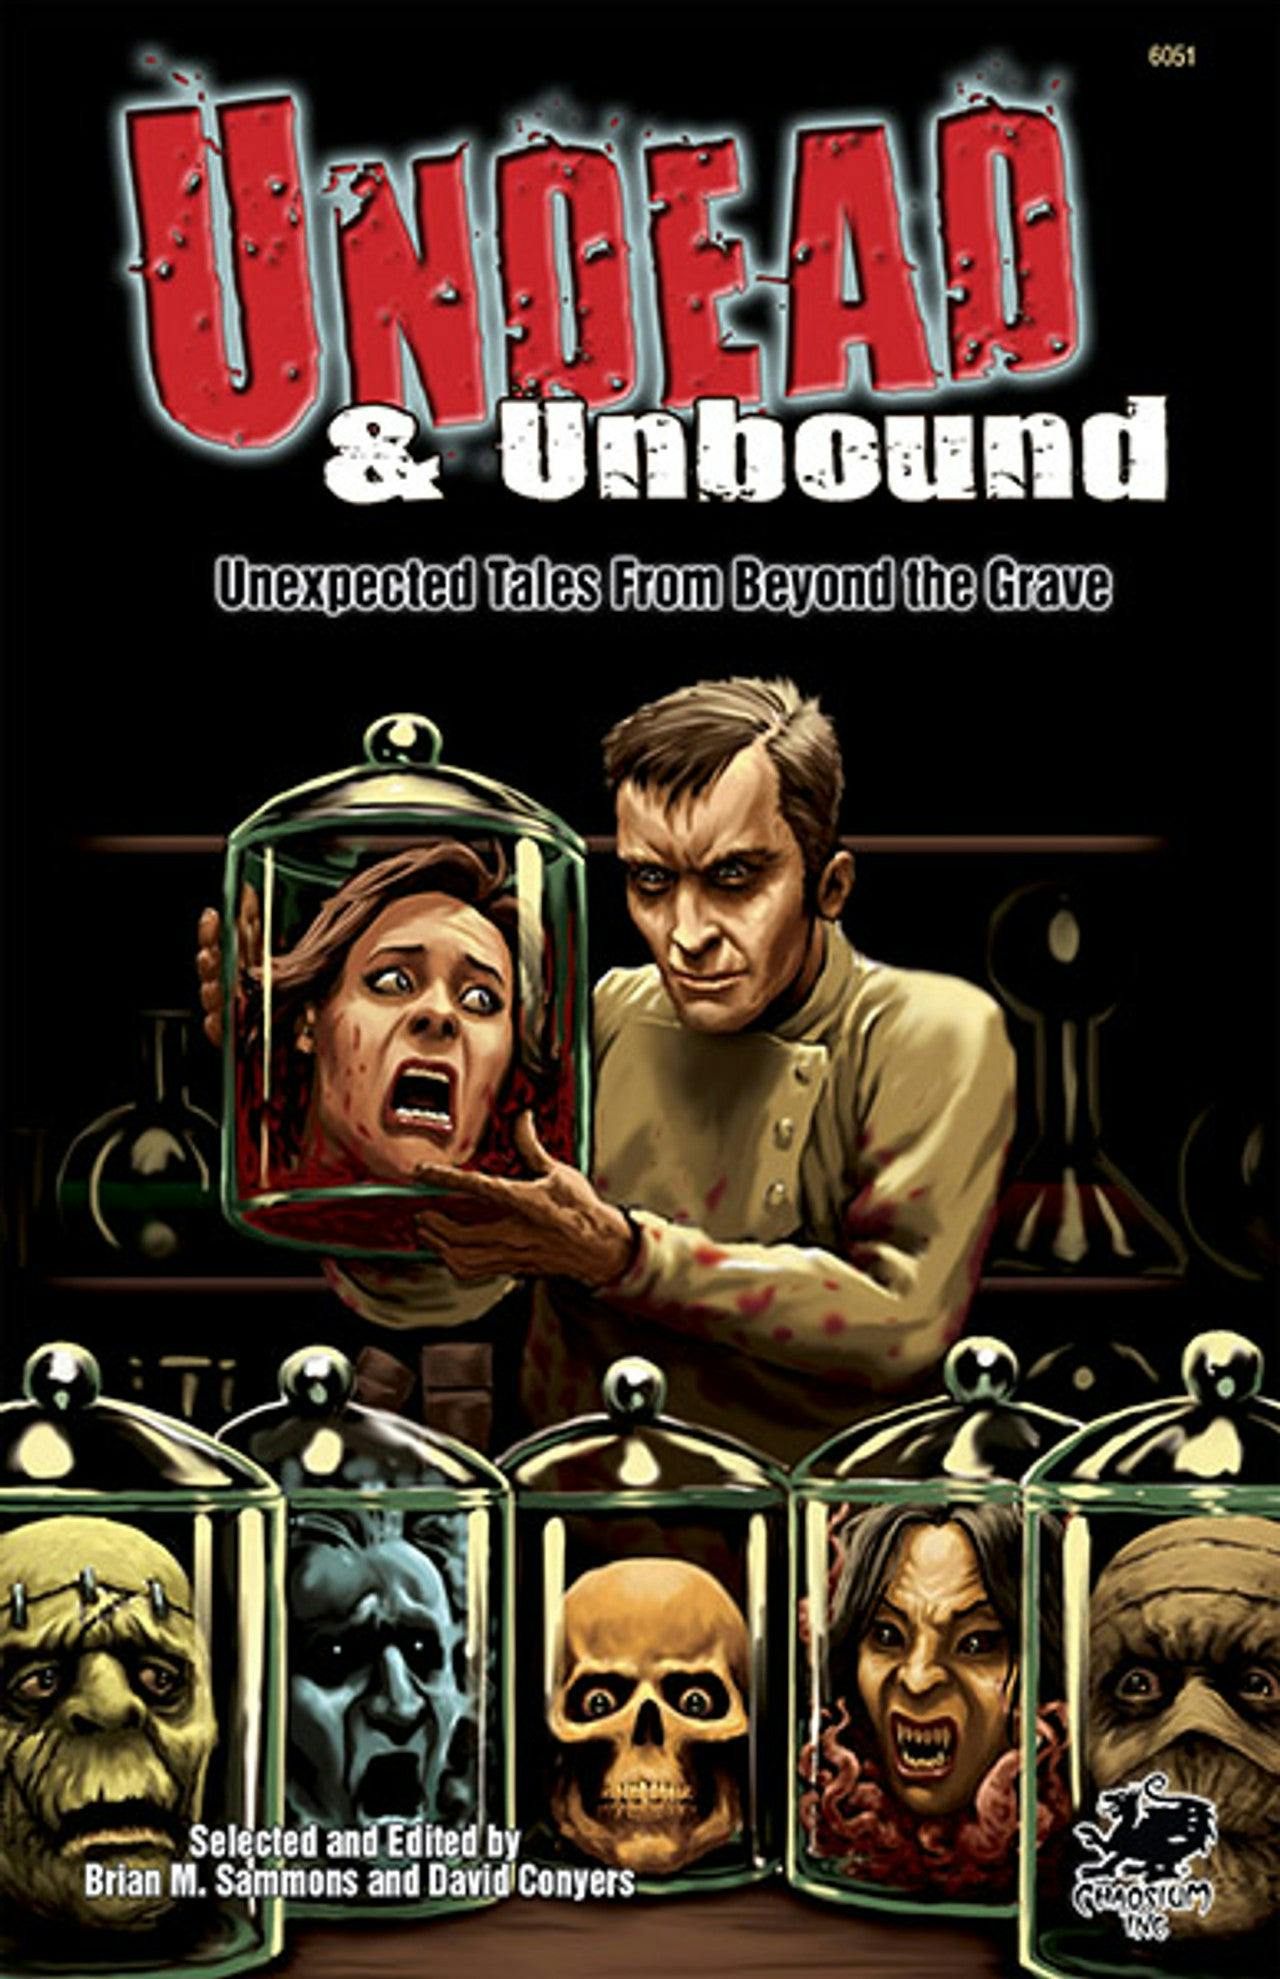 Call of Cthulhu: Undead & Unbound